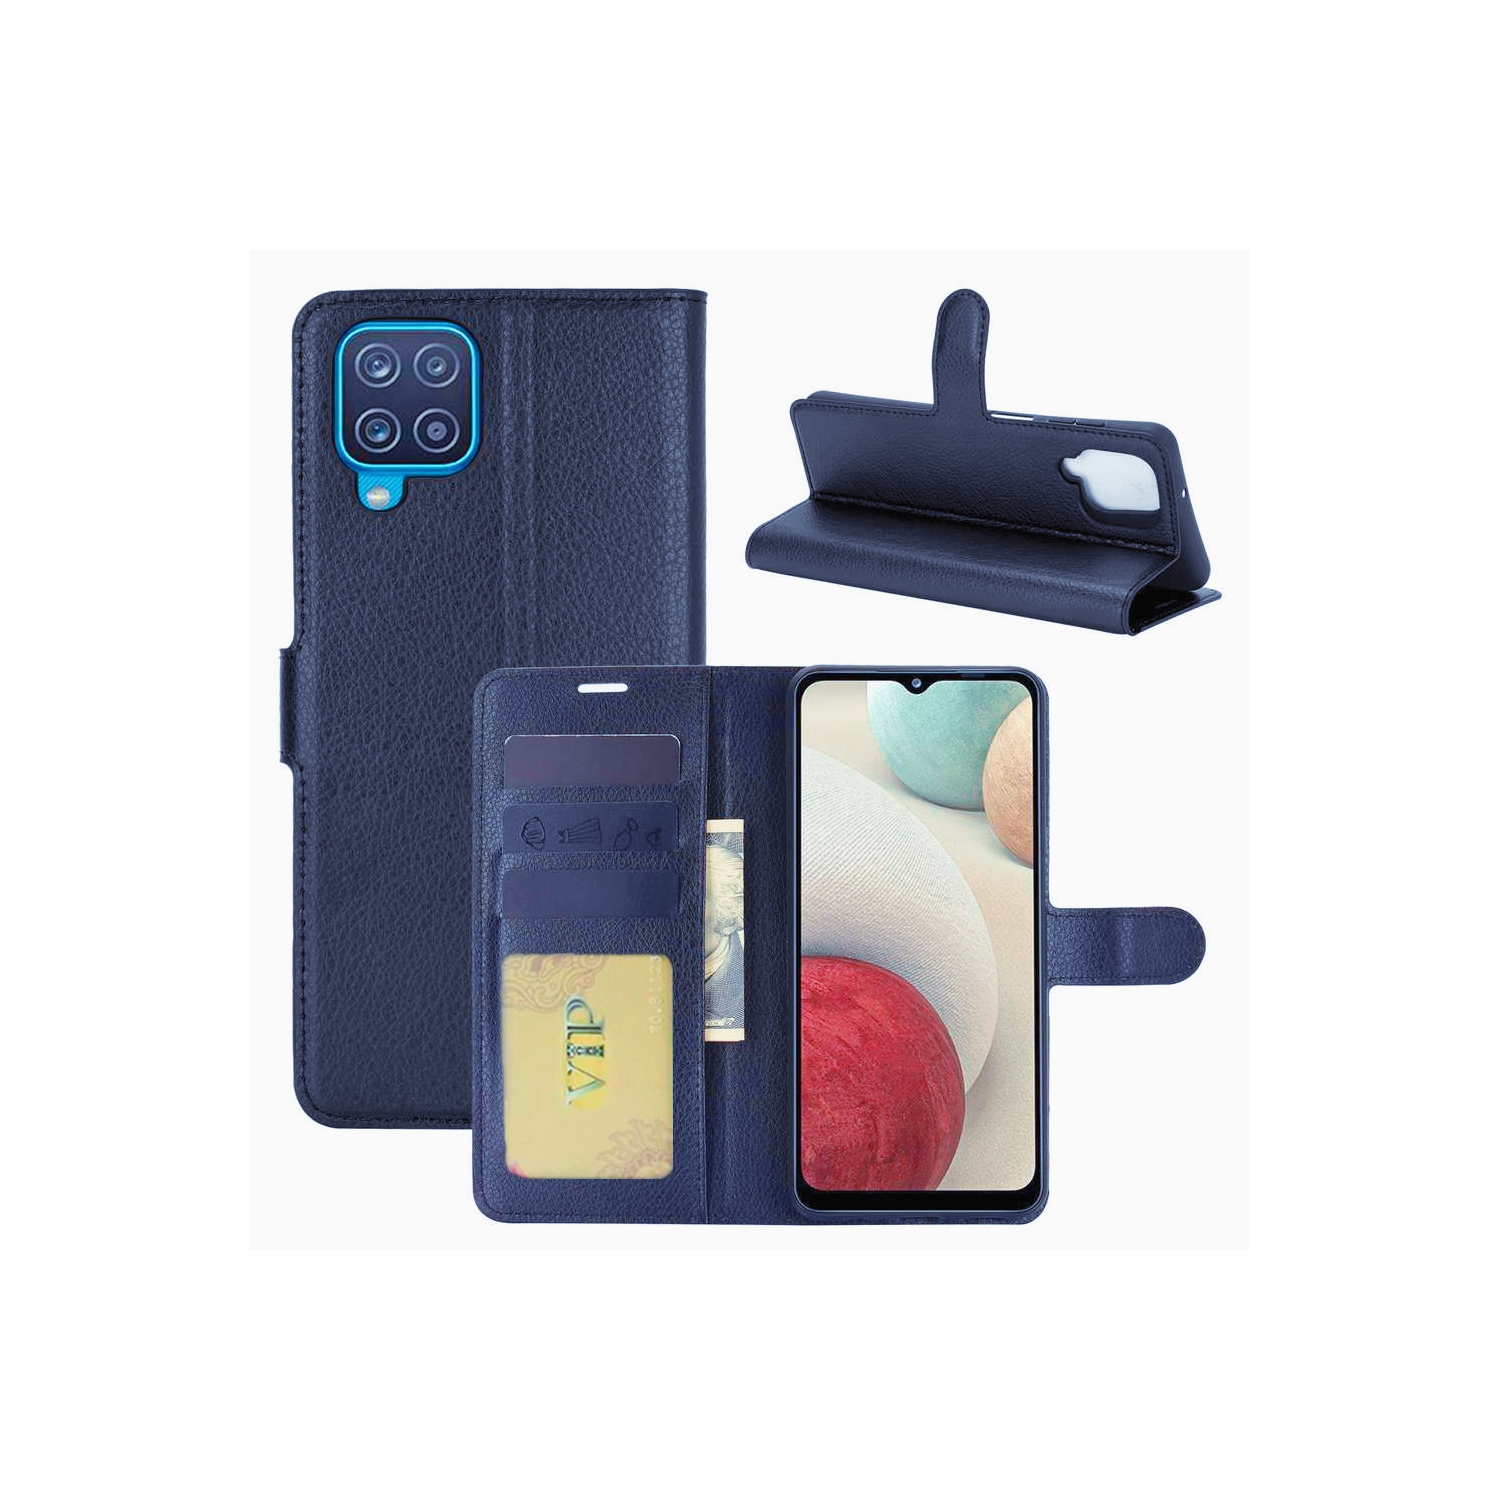 【CSmart】 Magnetic Card Slot Leather Folio Wallet Flip Case Cover for Samsung Galaxy A12 / M12 / F12, Navy